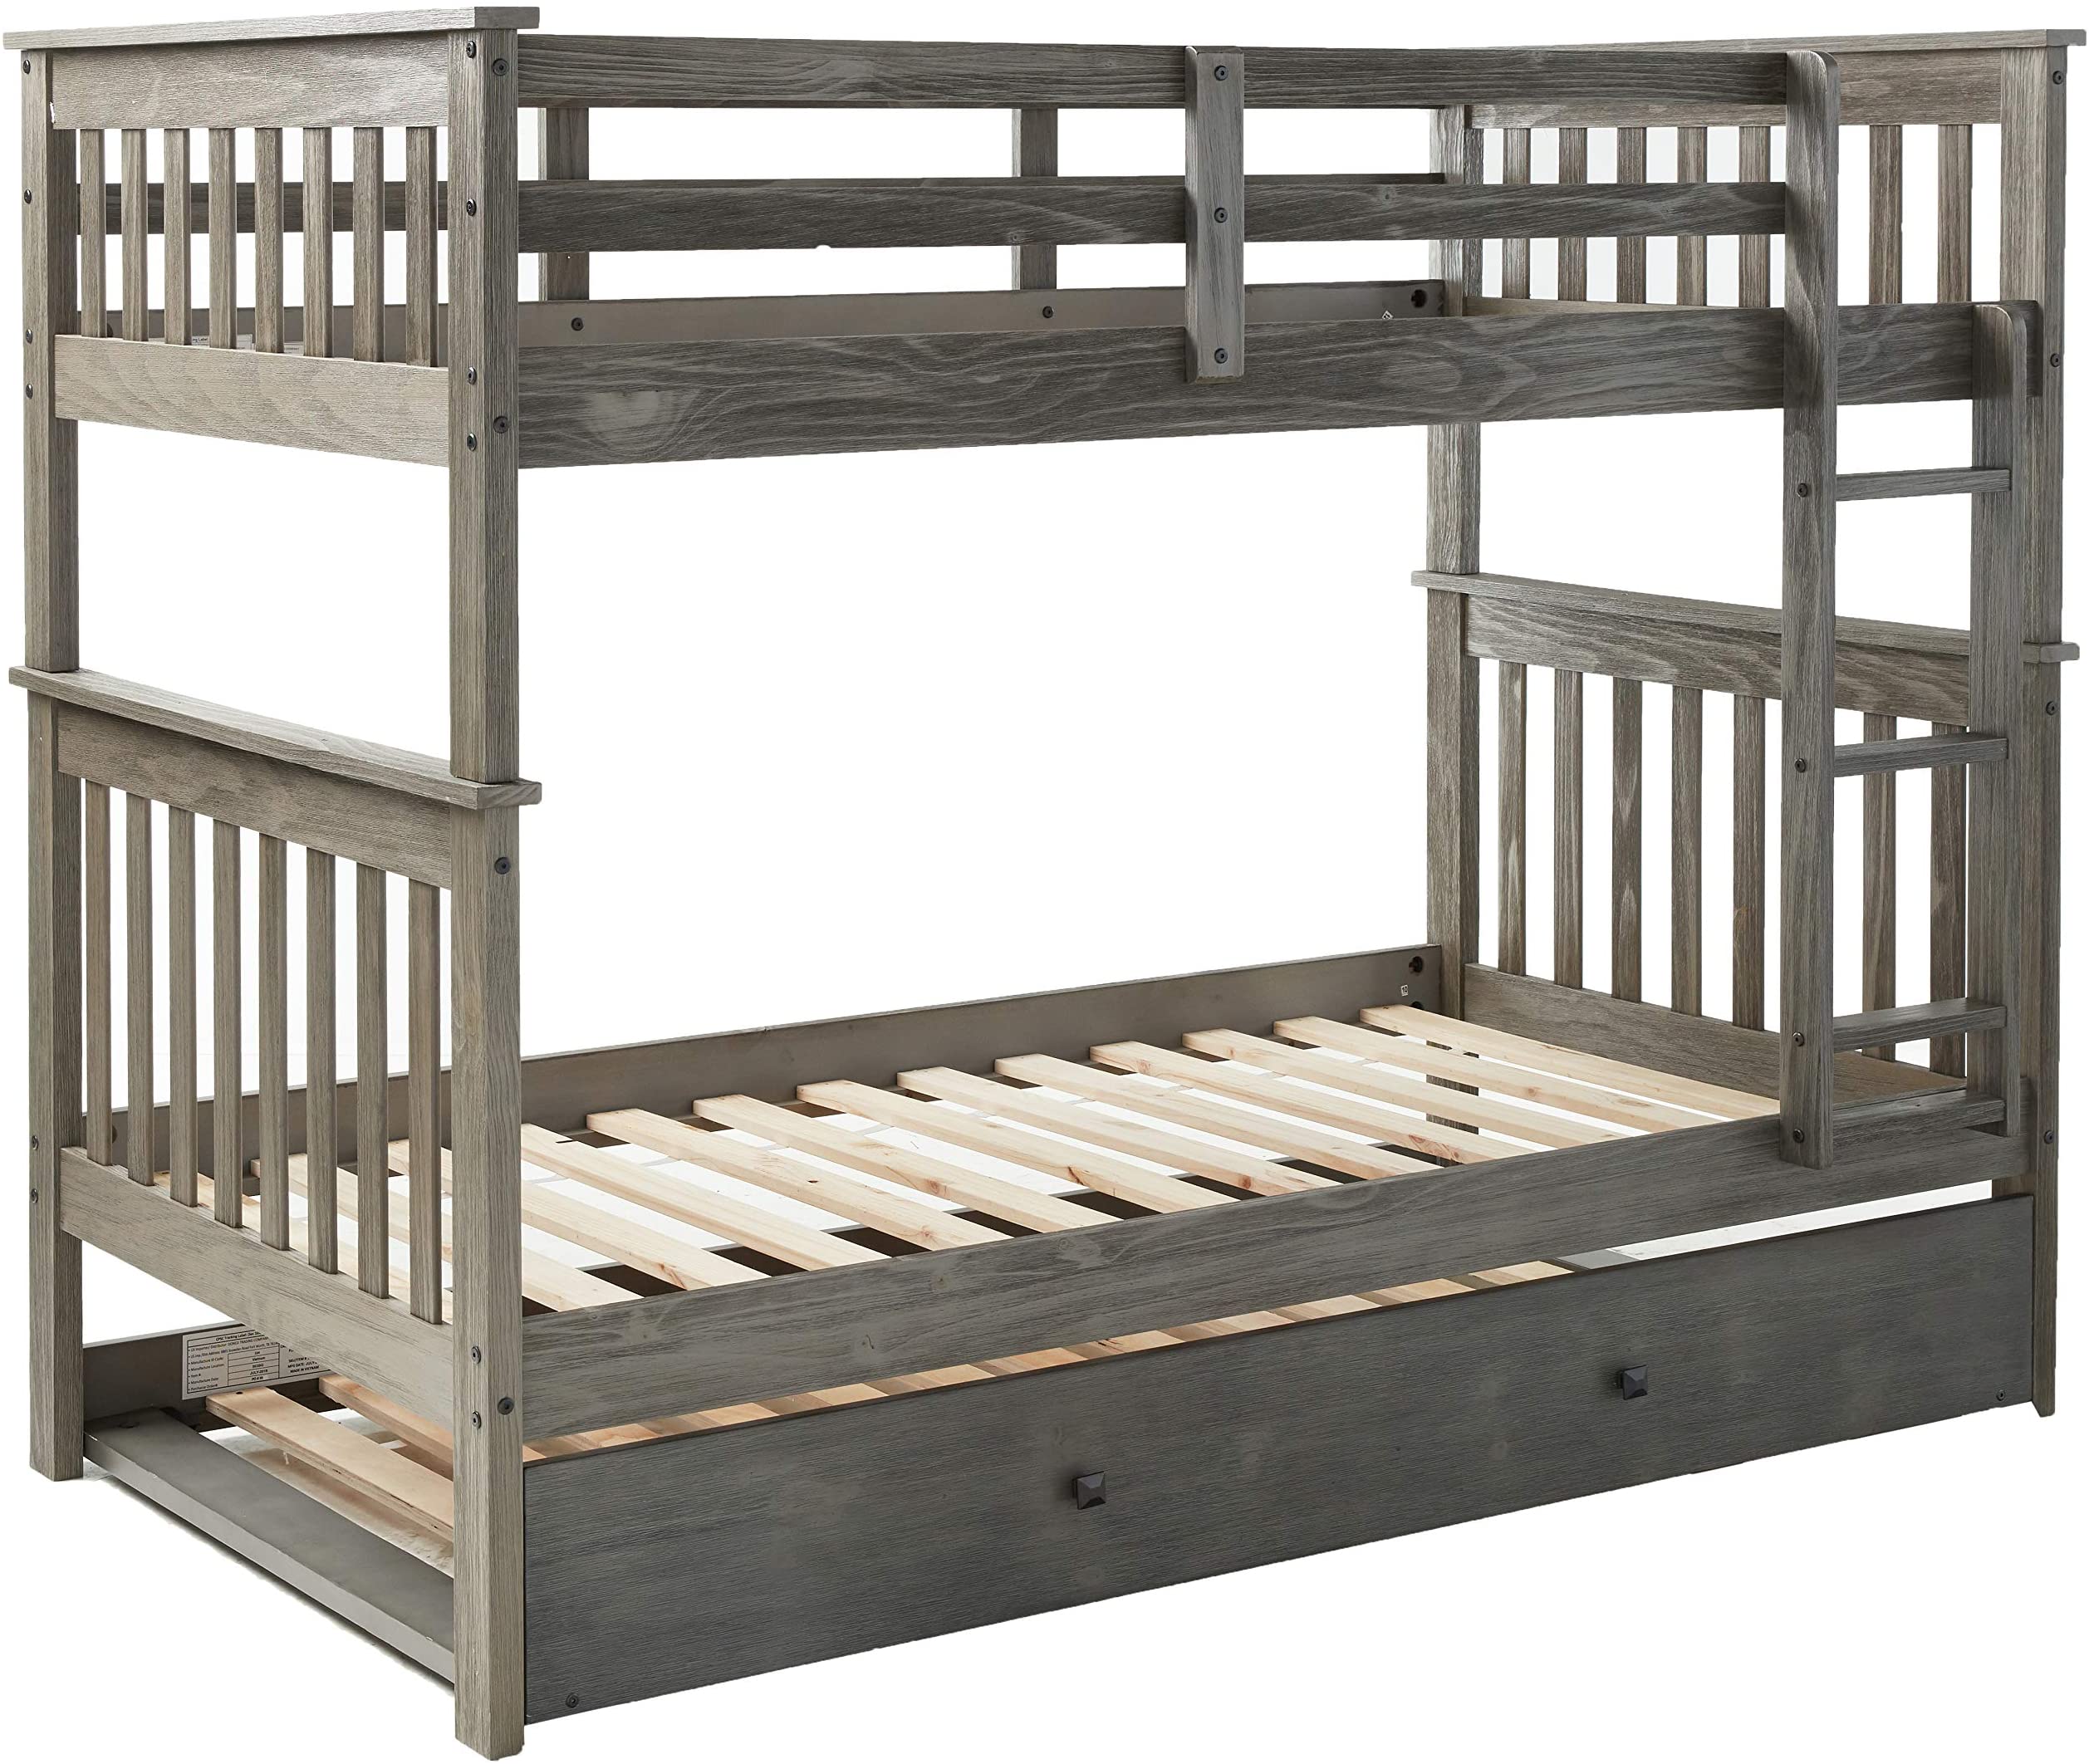 Donco Kids Mission Bunk Bed with Trundle